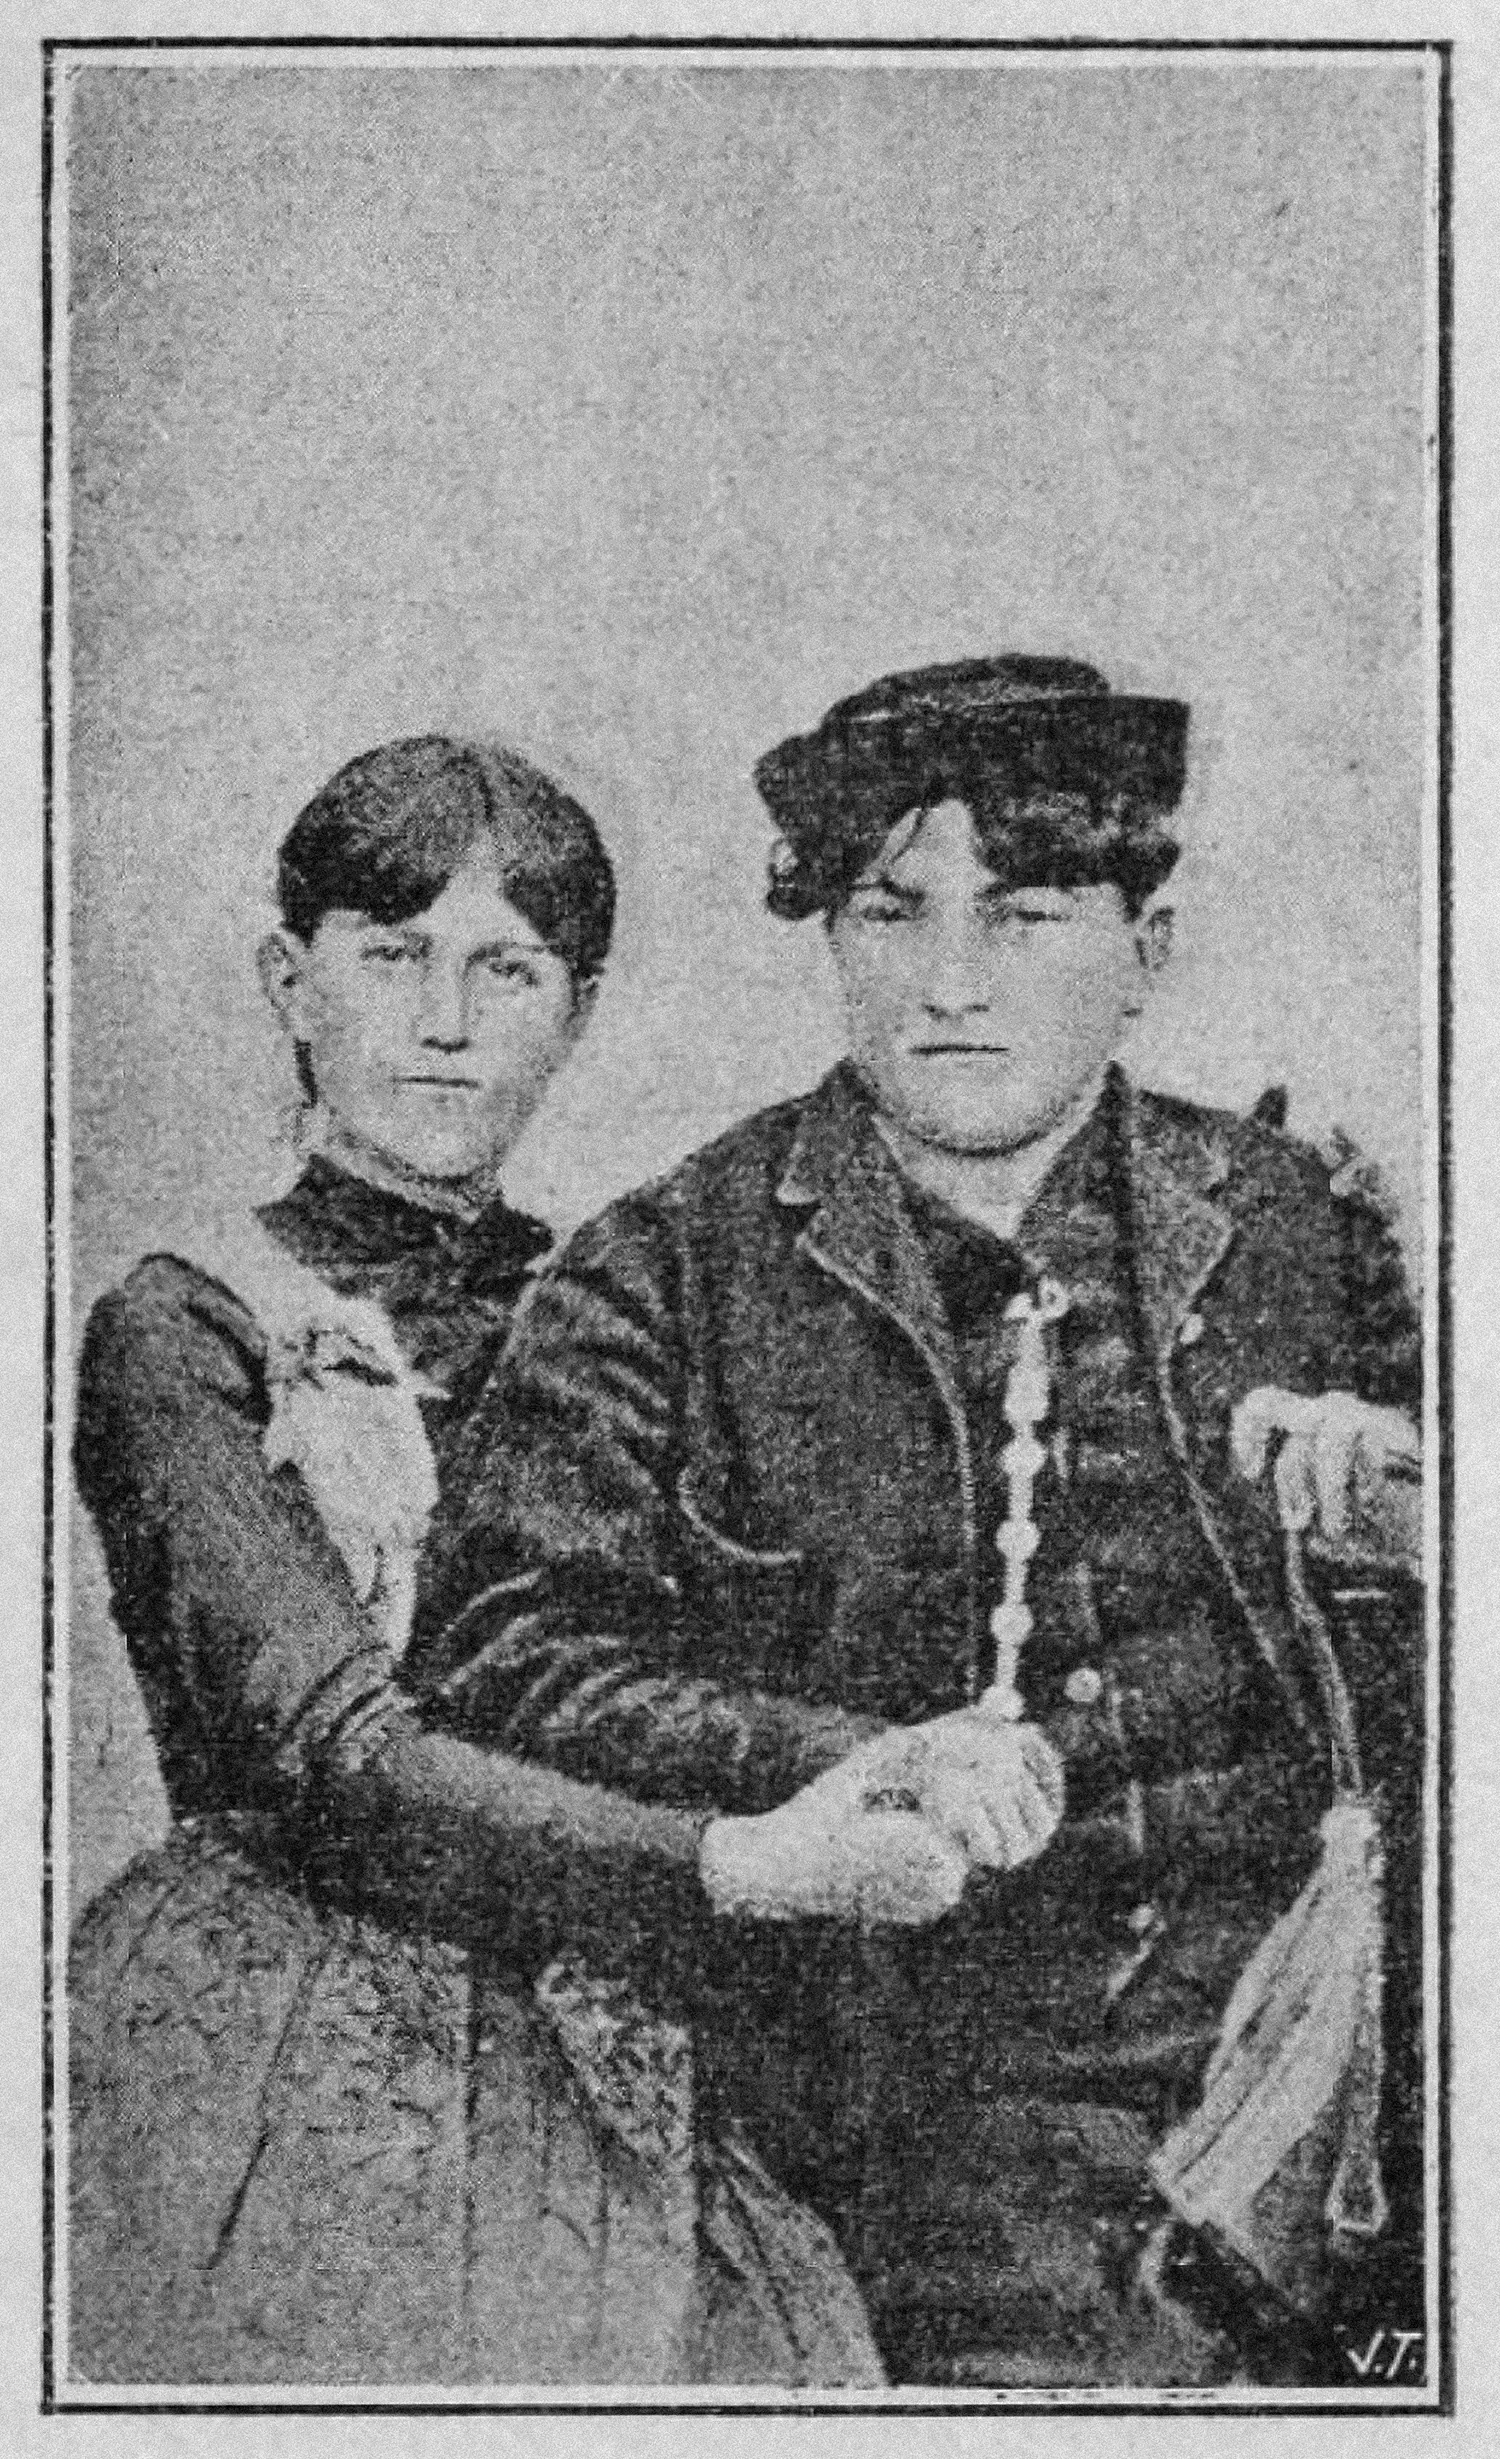 Two women. The woman on the right is dressed in traditional feminine clothing of the time, the one on the left has short hair and appears to be wearing masculine clothes. They embrace as they defiantly face the camera.